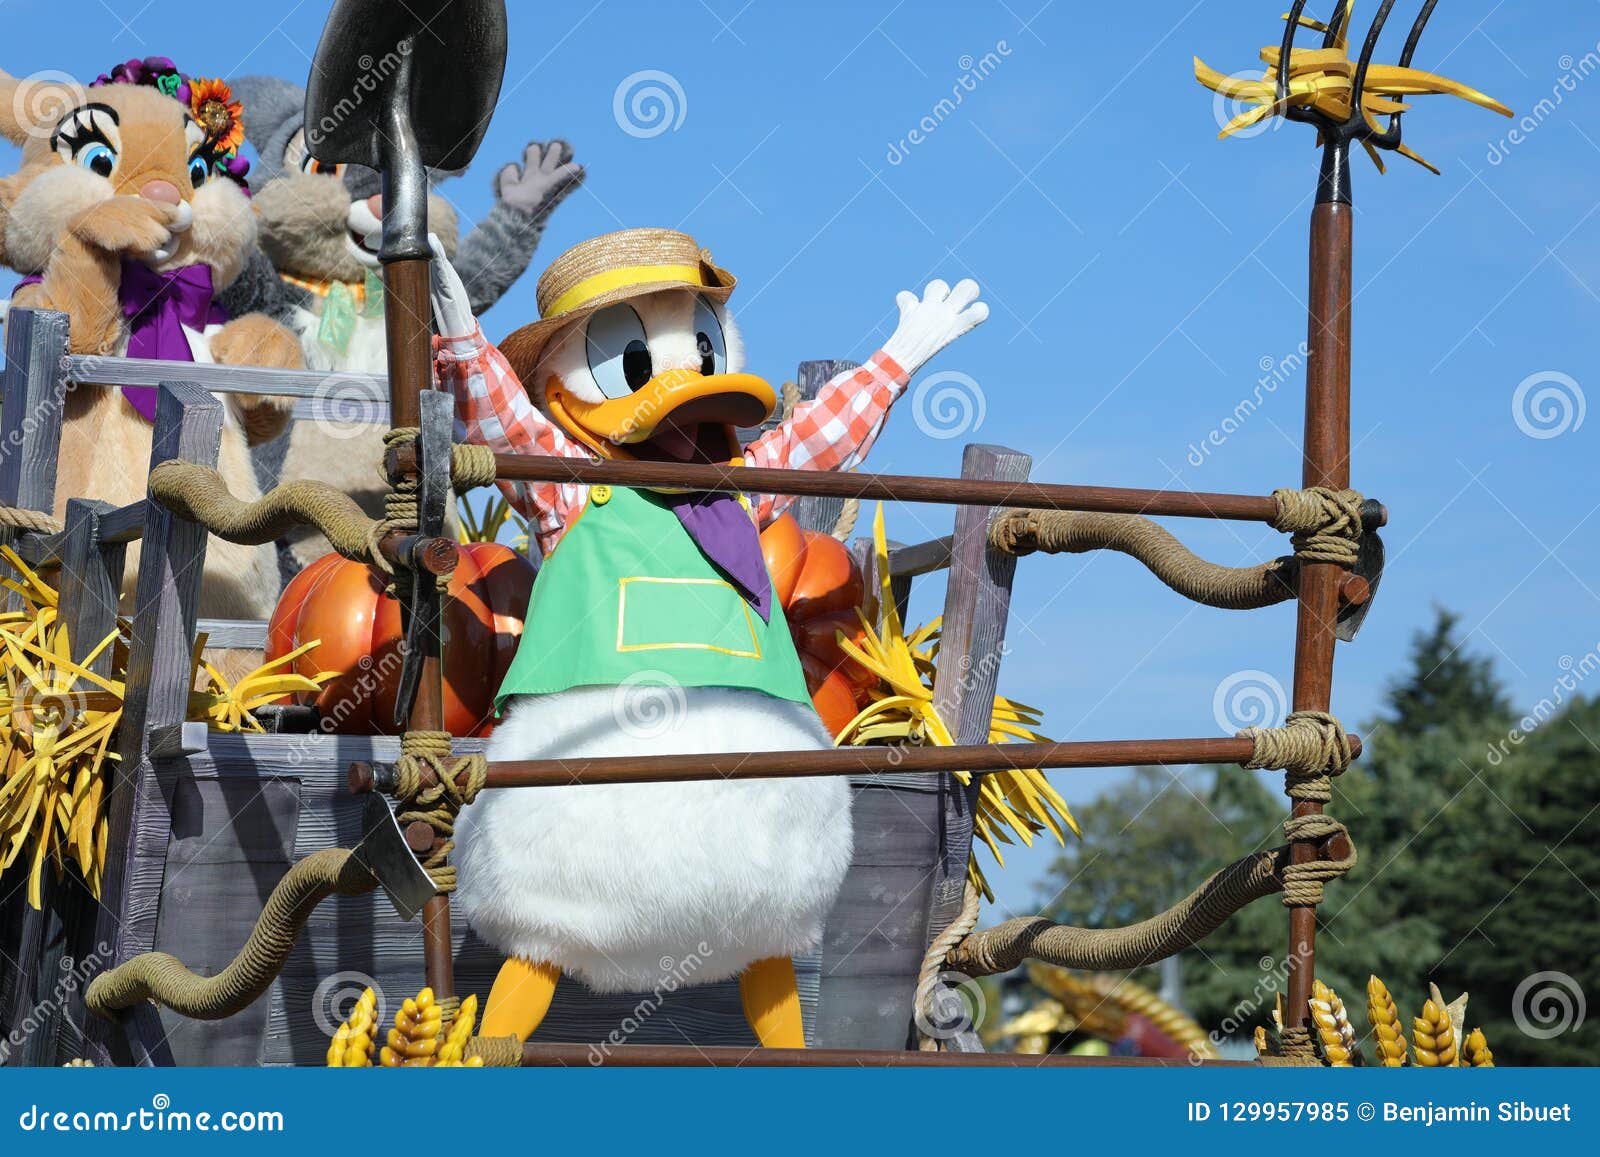 Disney Halloween Parade with Disney Characters in Disneyland Par Editorial  Image - Image of outside, magic: 129957985